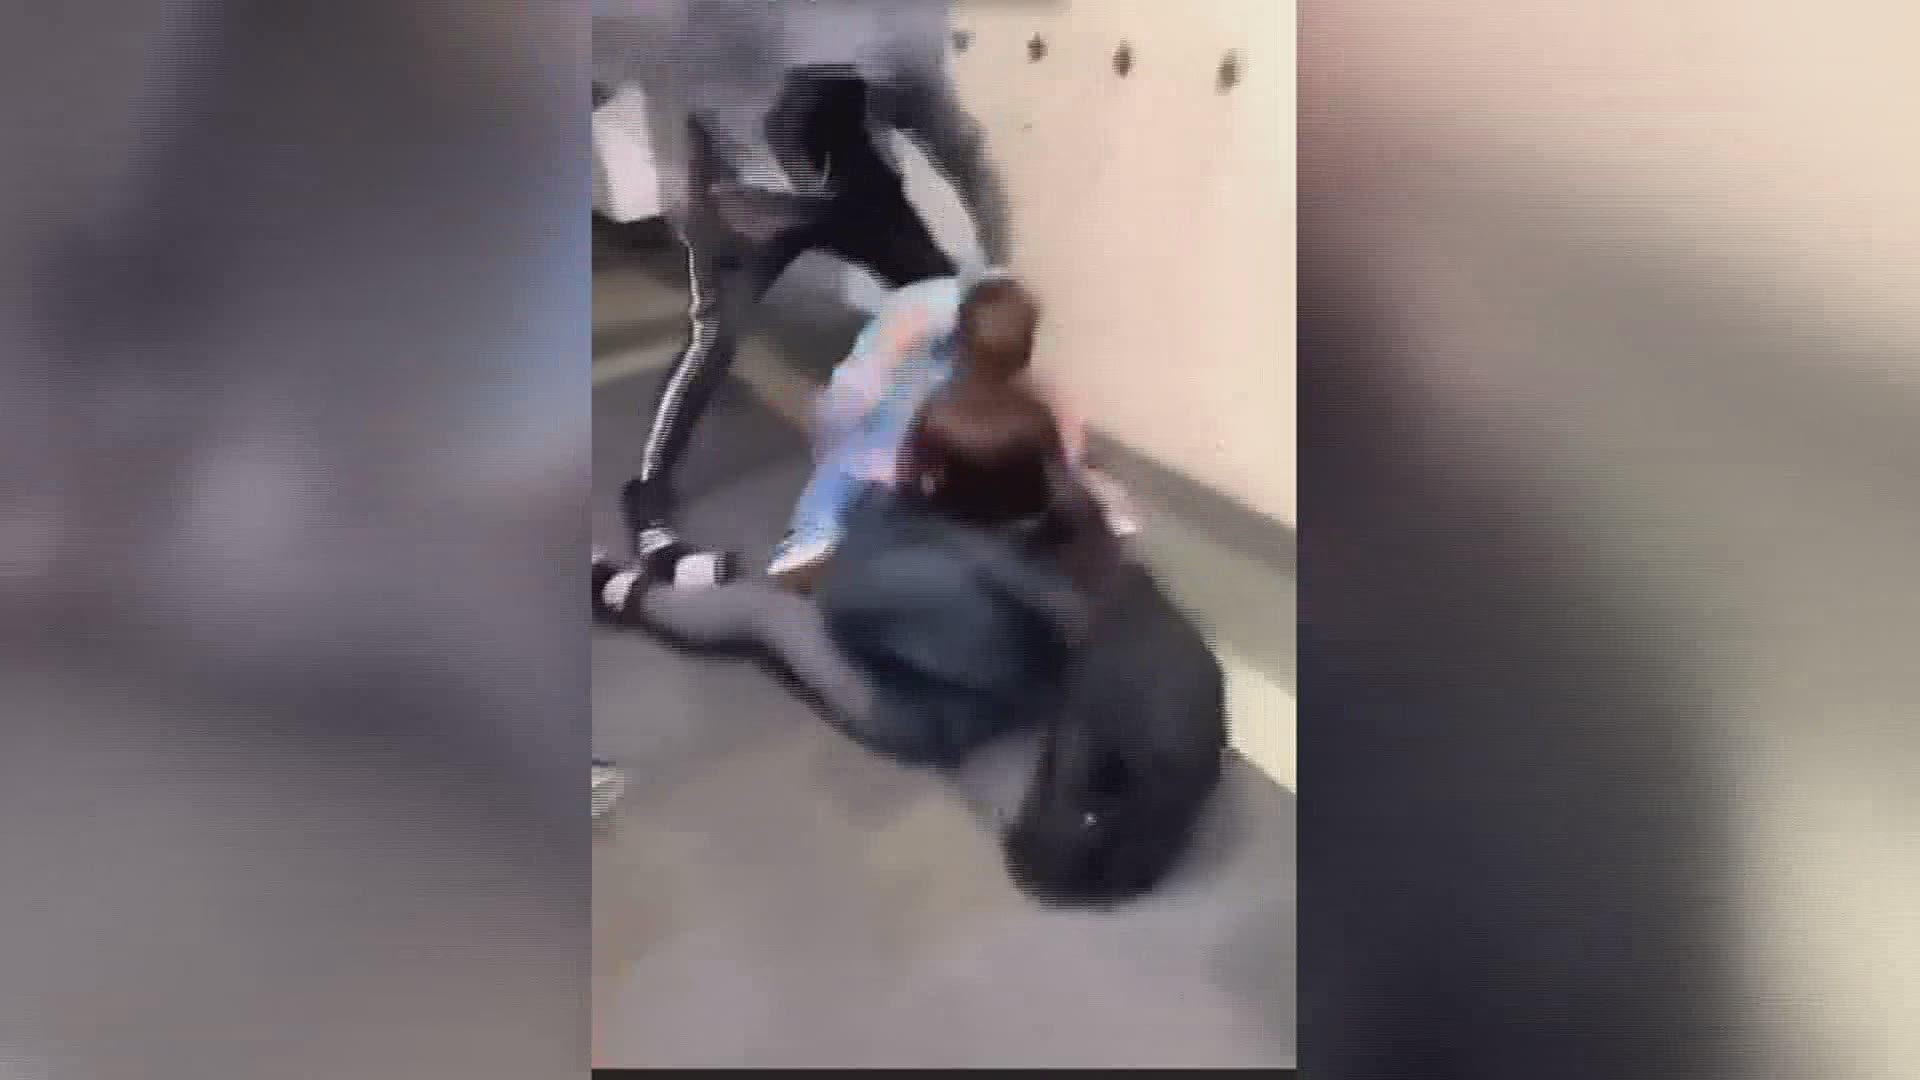 The video shows the 15 year old student being yanked backwards to the ground